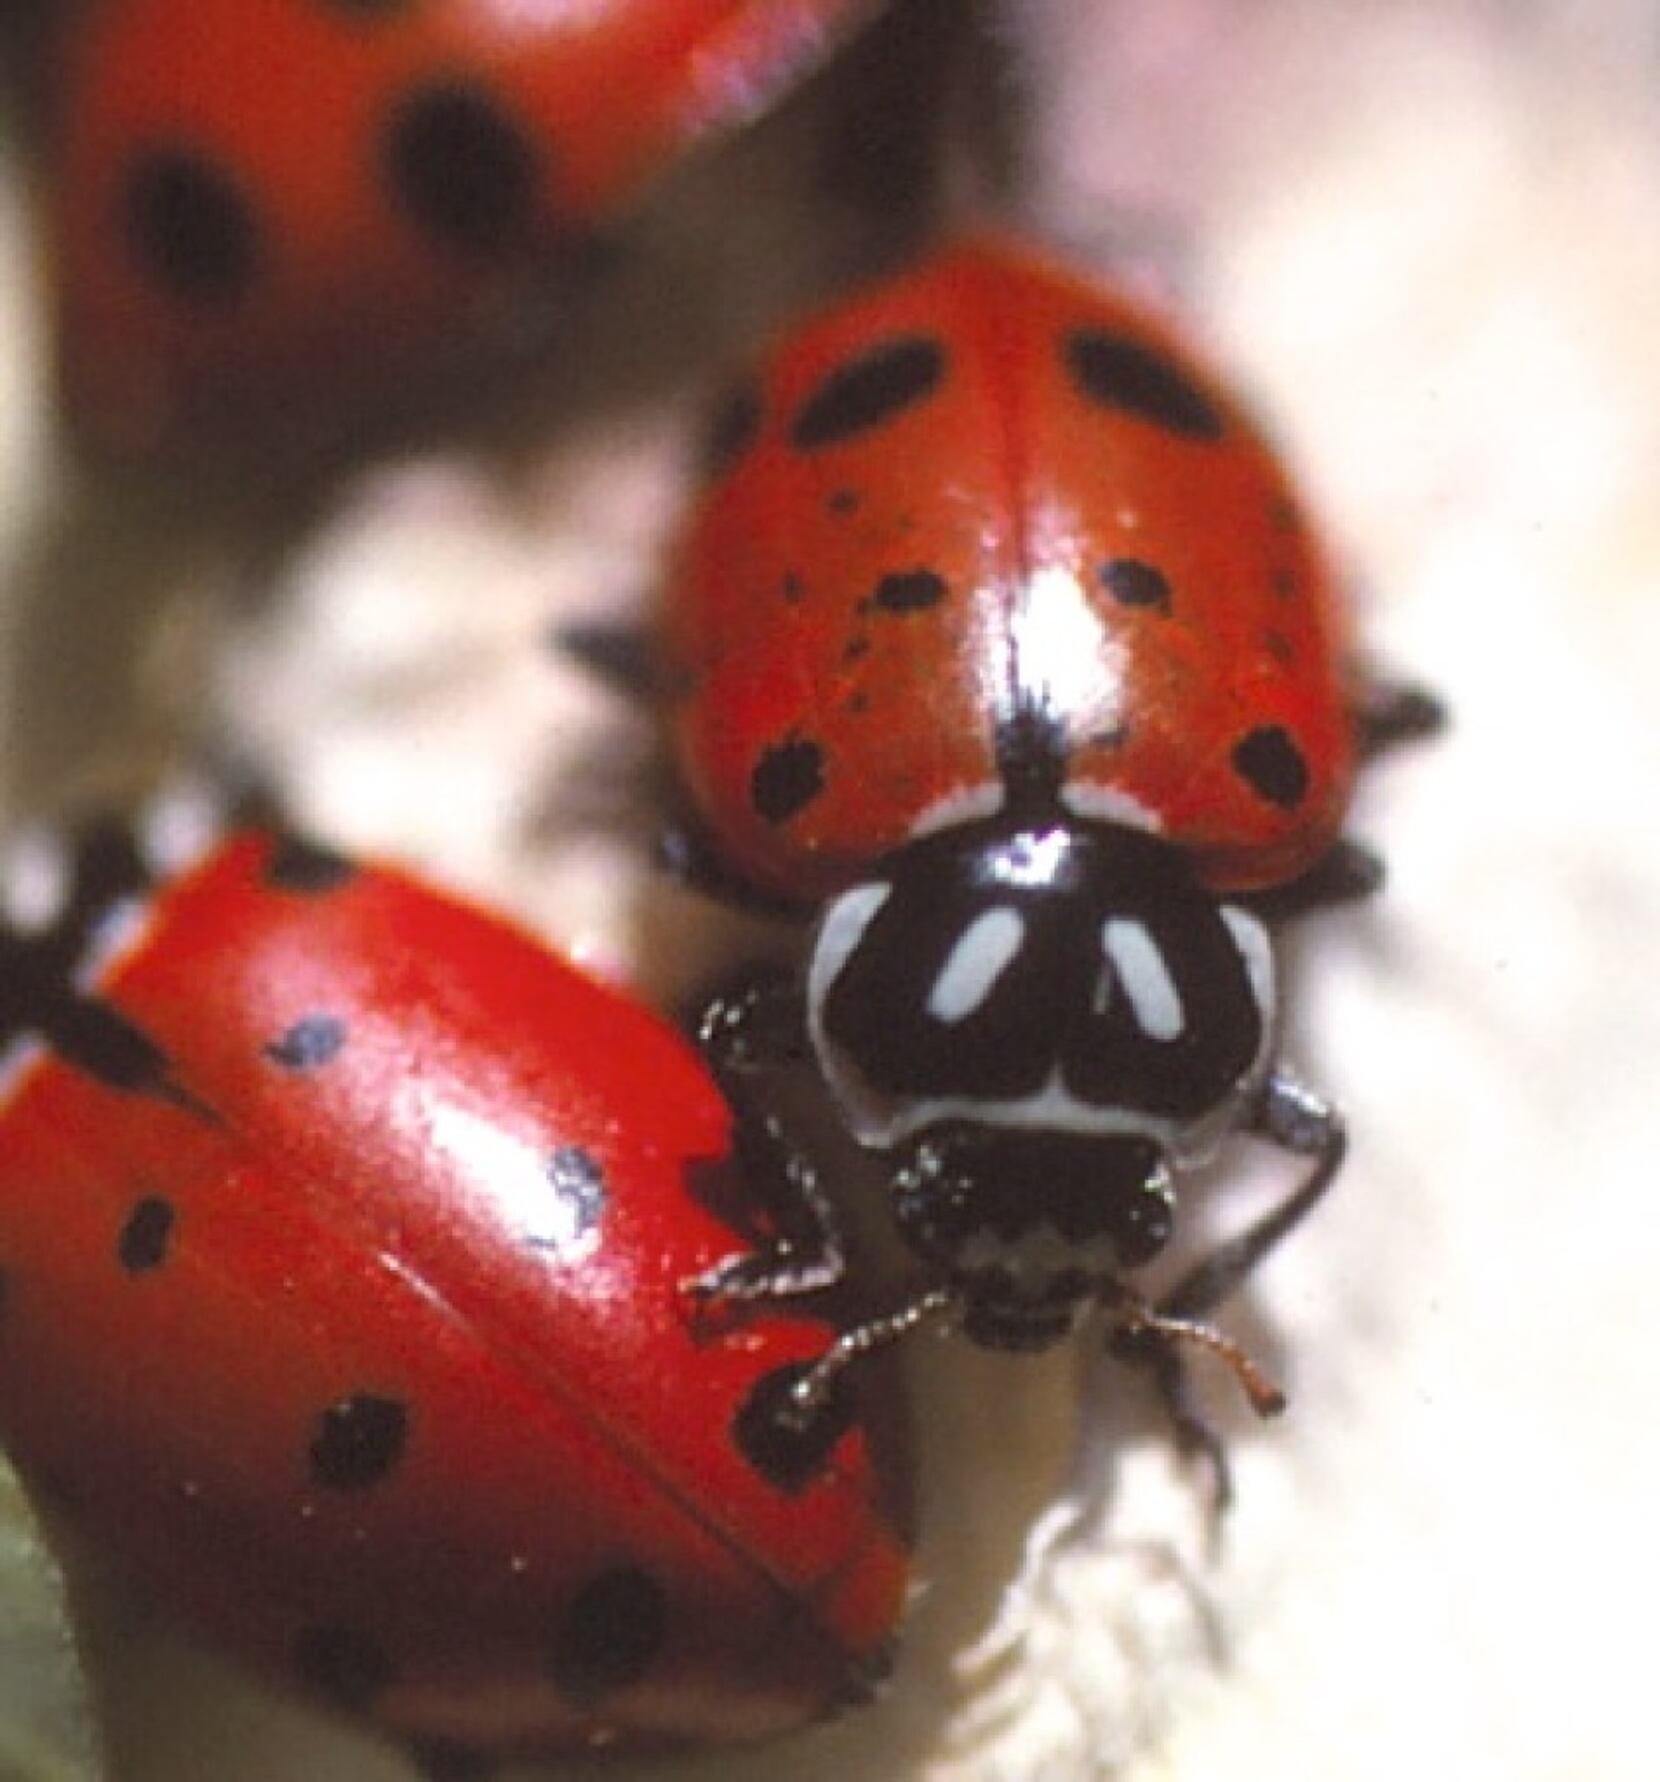 Those orange ladybugs you see may not be native, but they're still